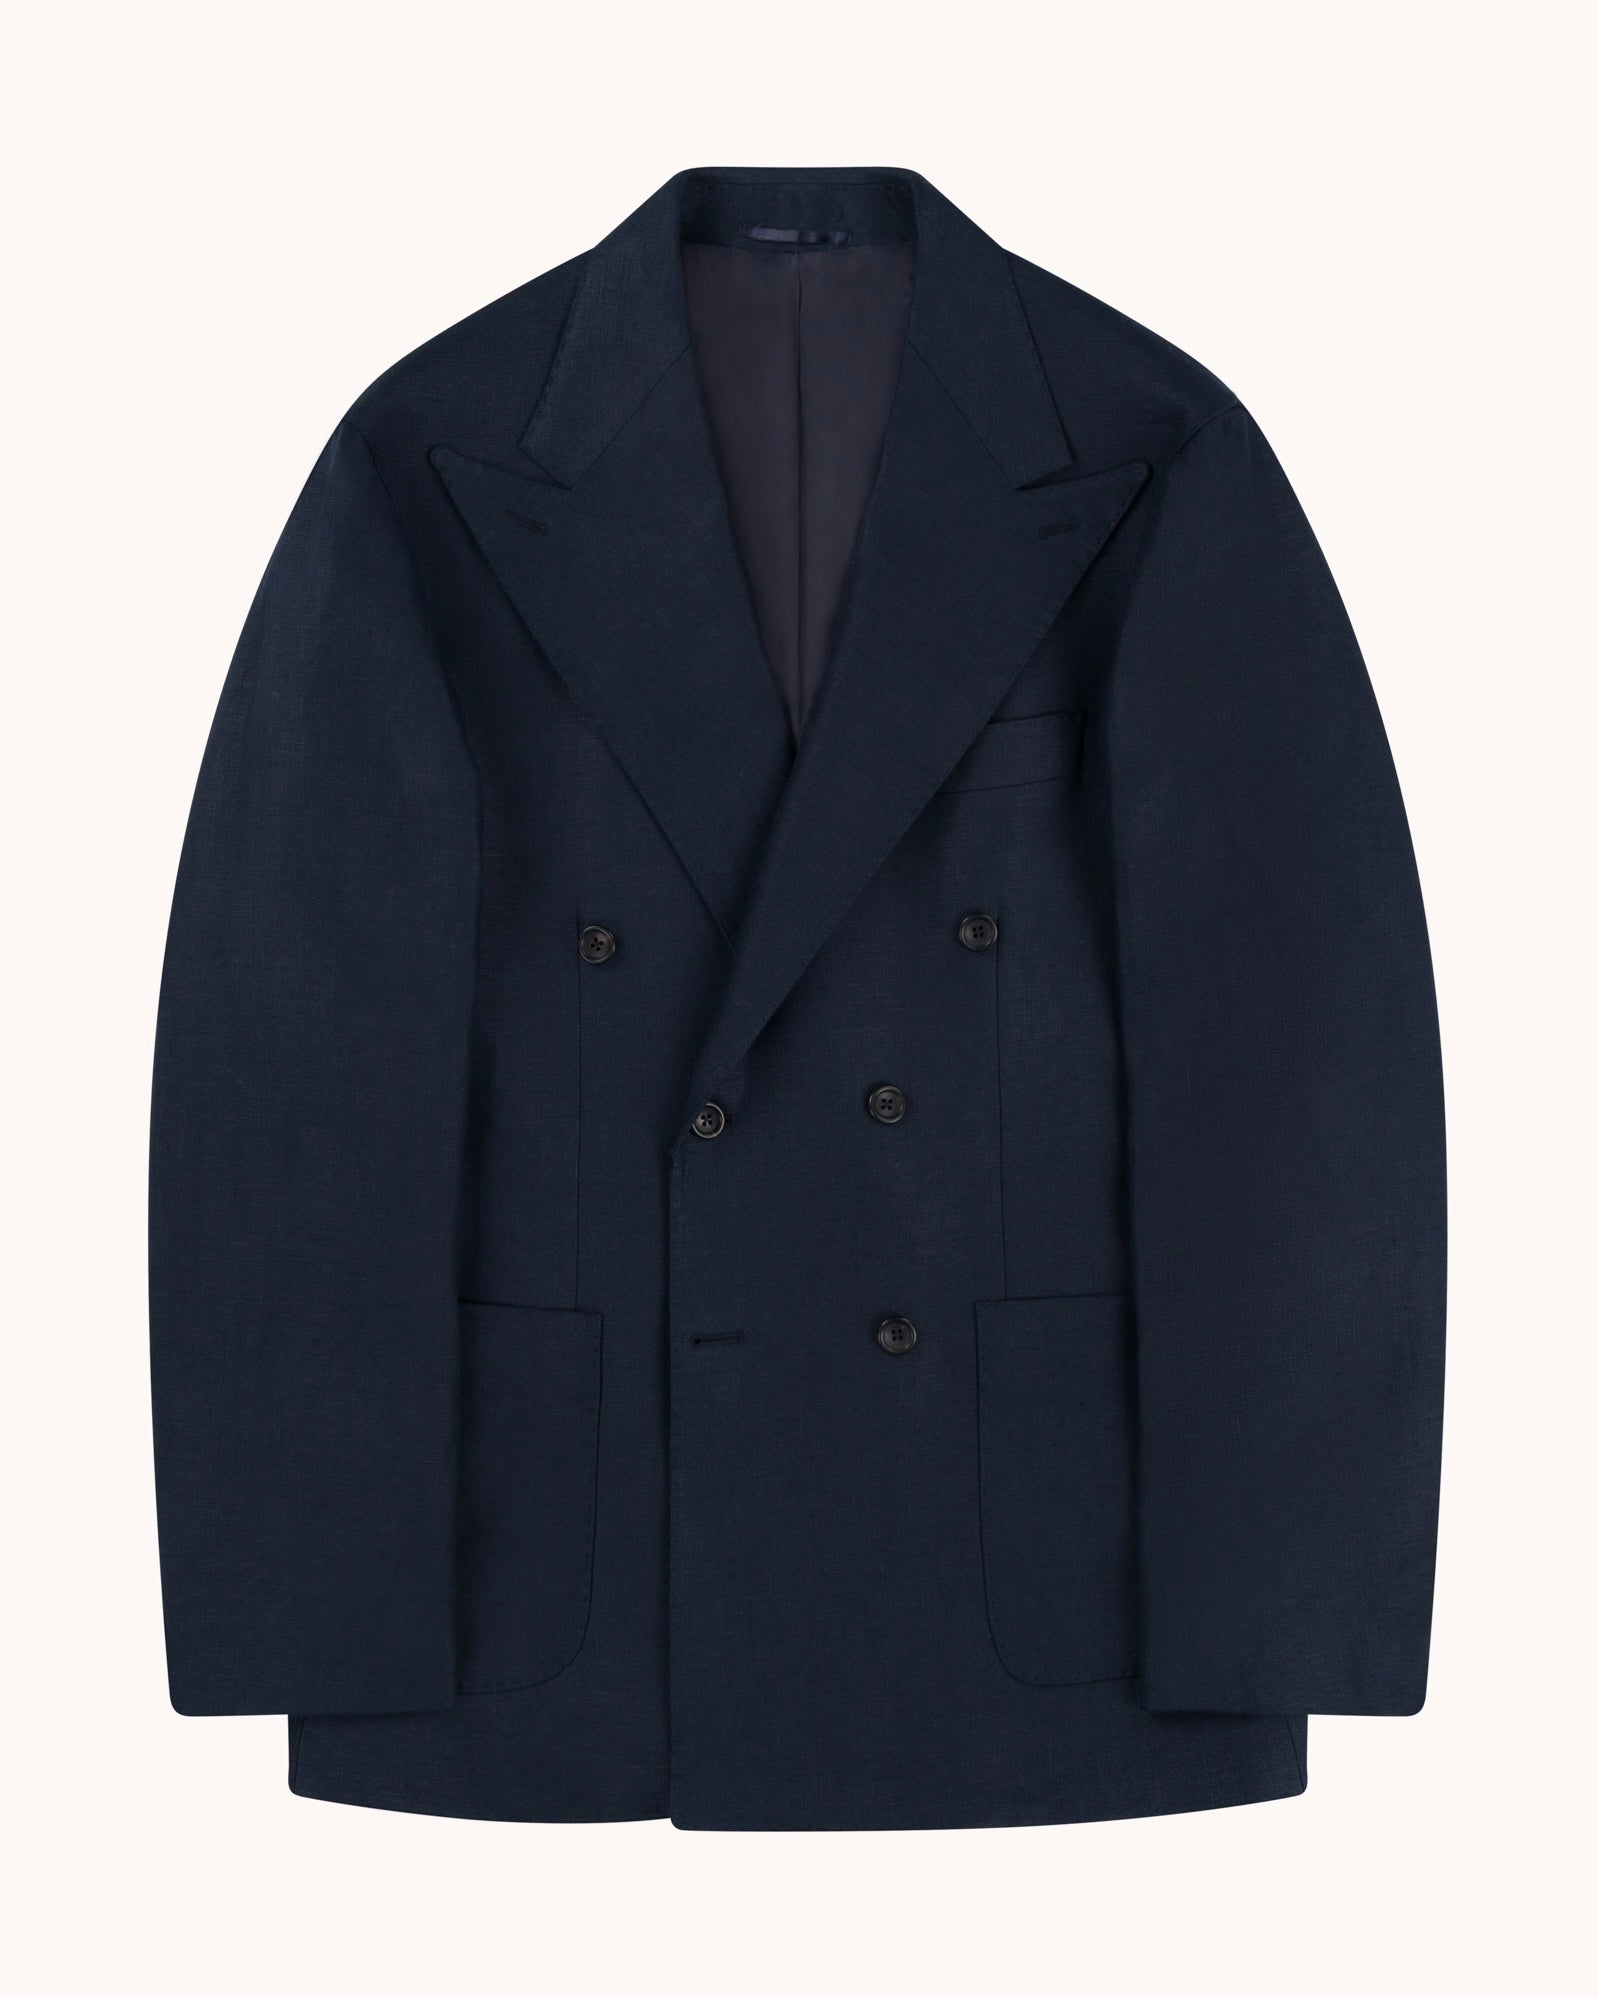 Double Breasted Sport Jacket - Navy Linen